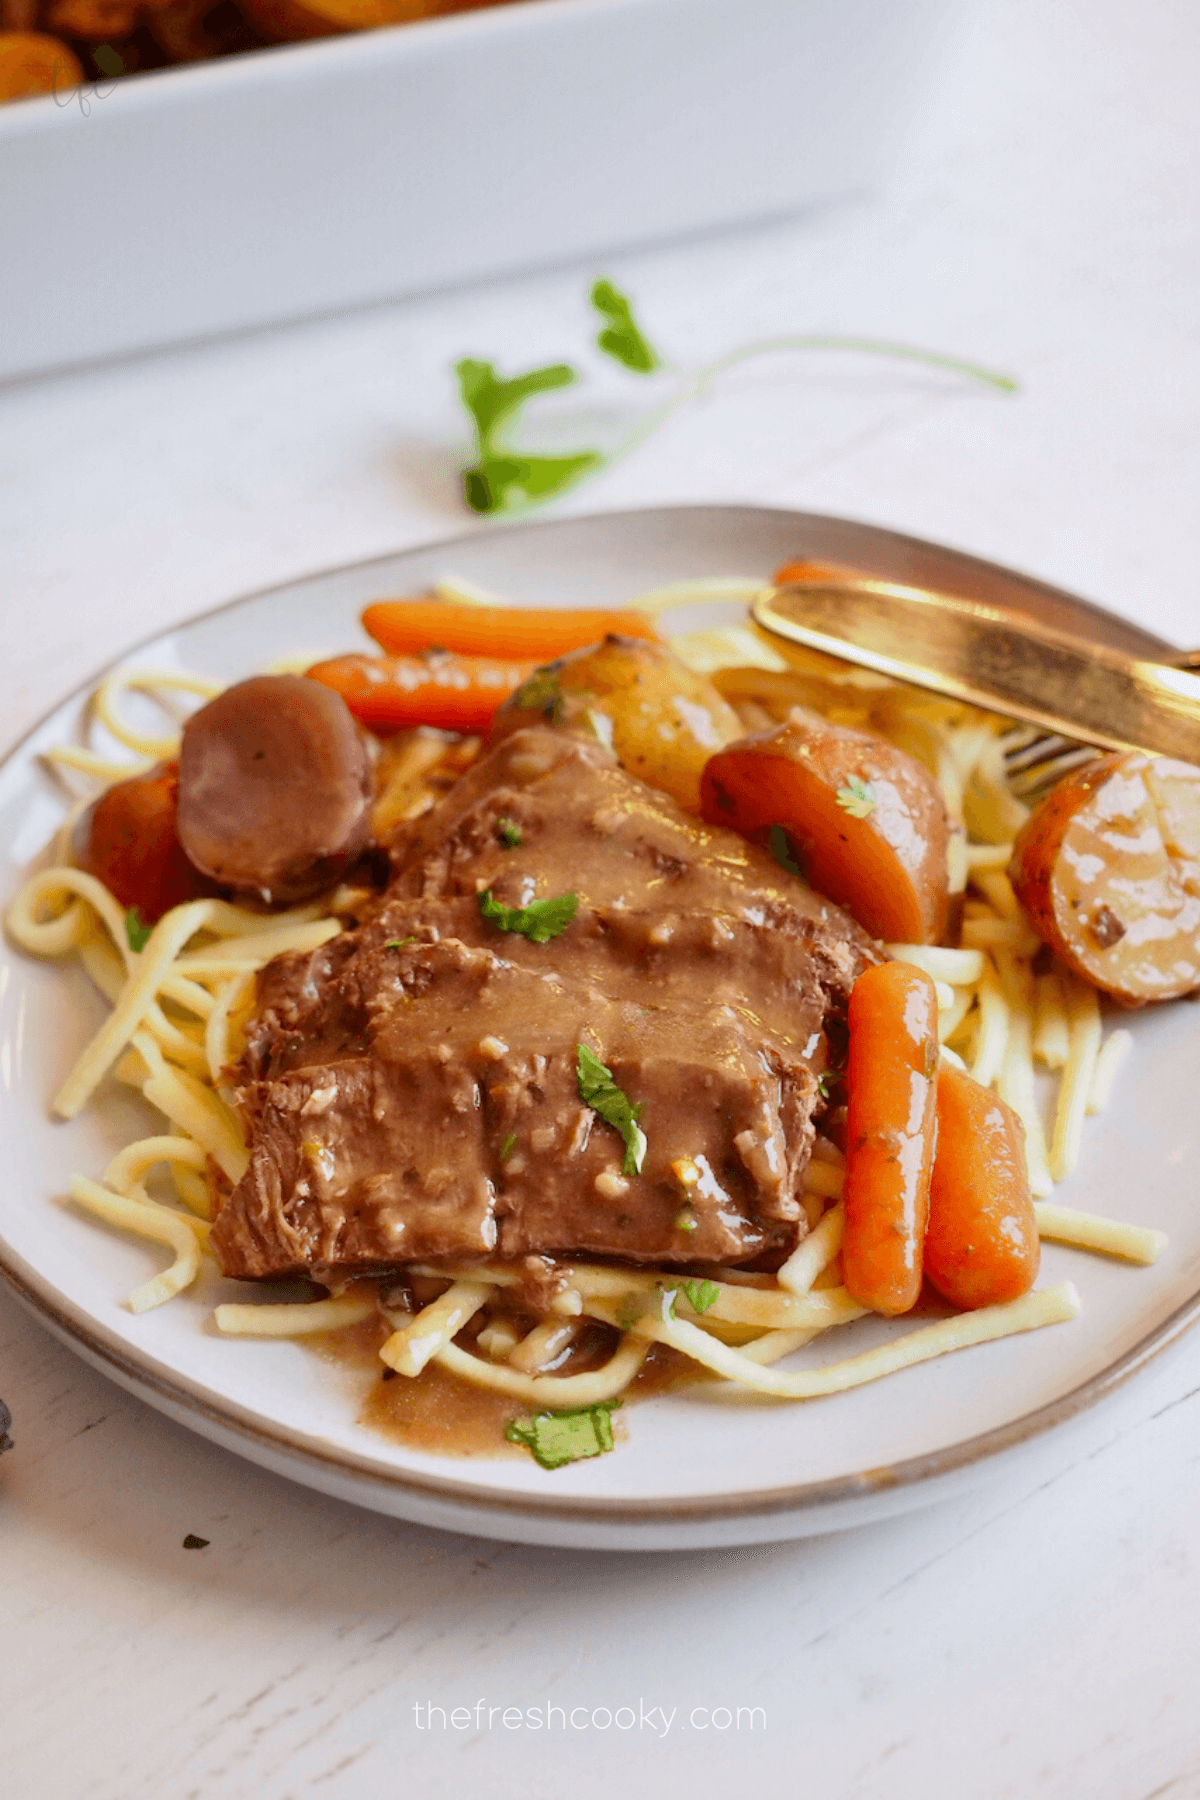 Crockpot London Broil on a plate with egg noodles, carrots and potatoes.